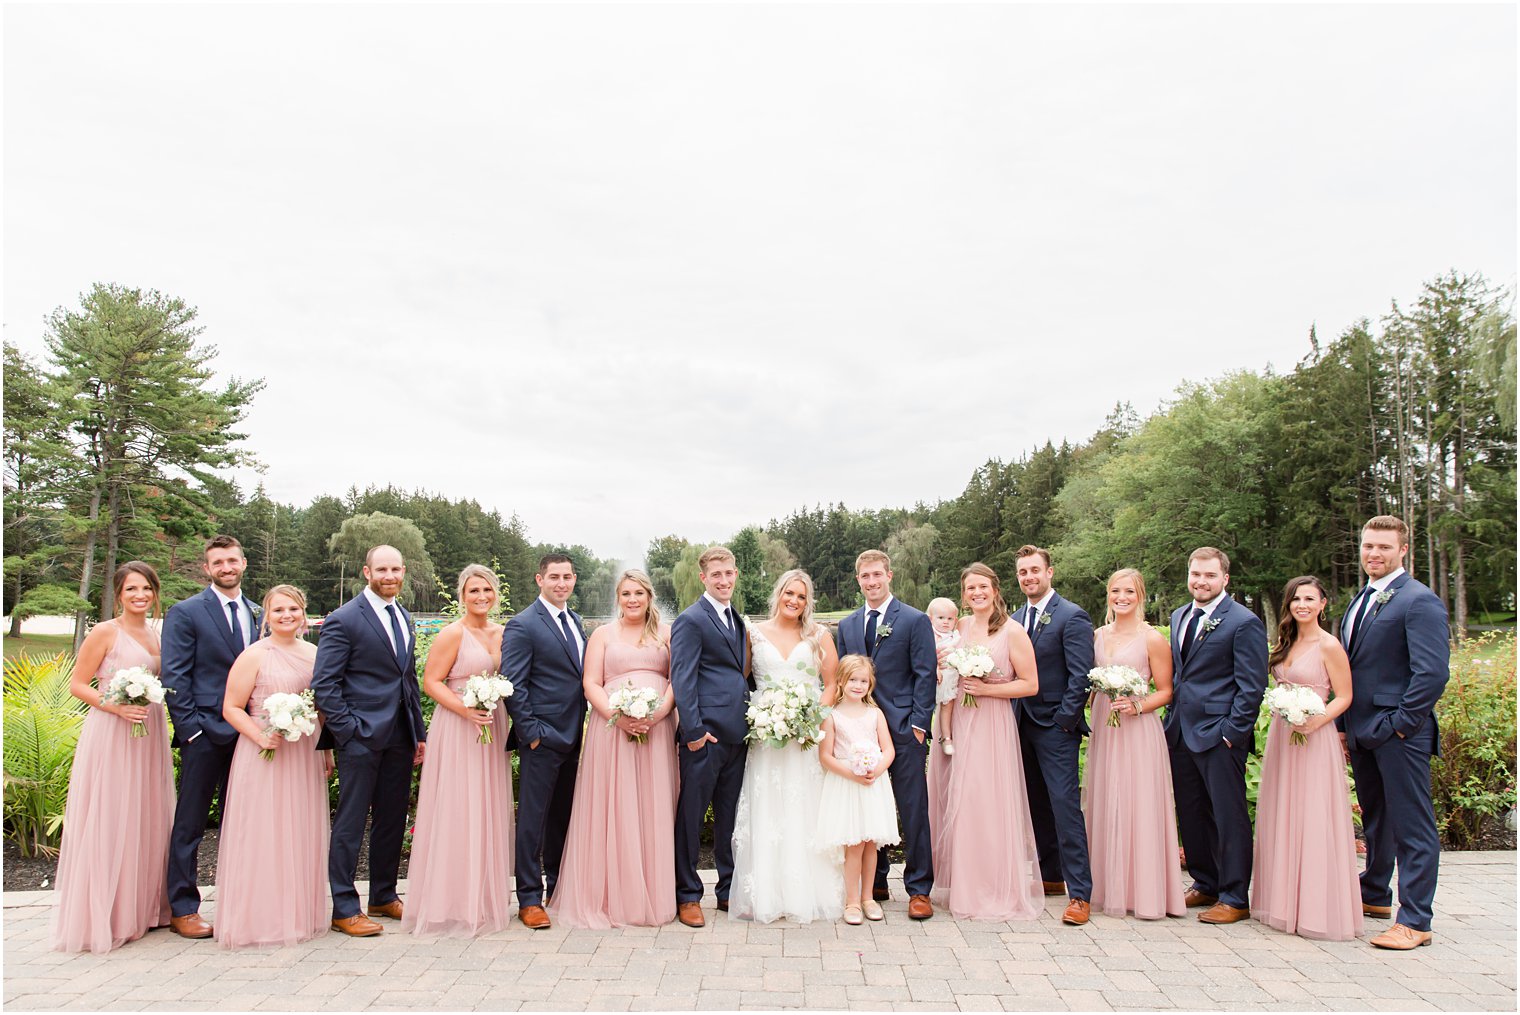 newlyweds pose with wedding party in pink and navy